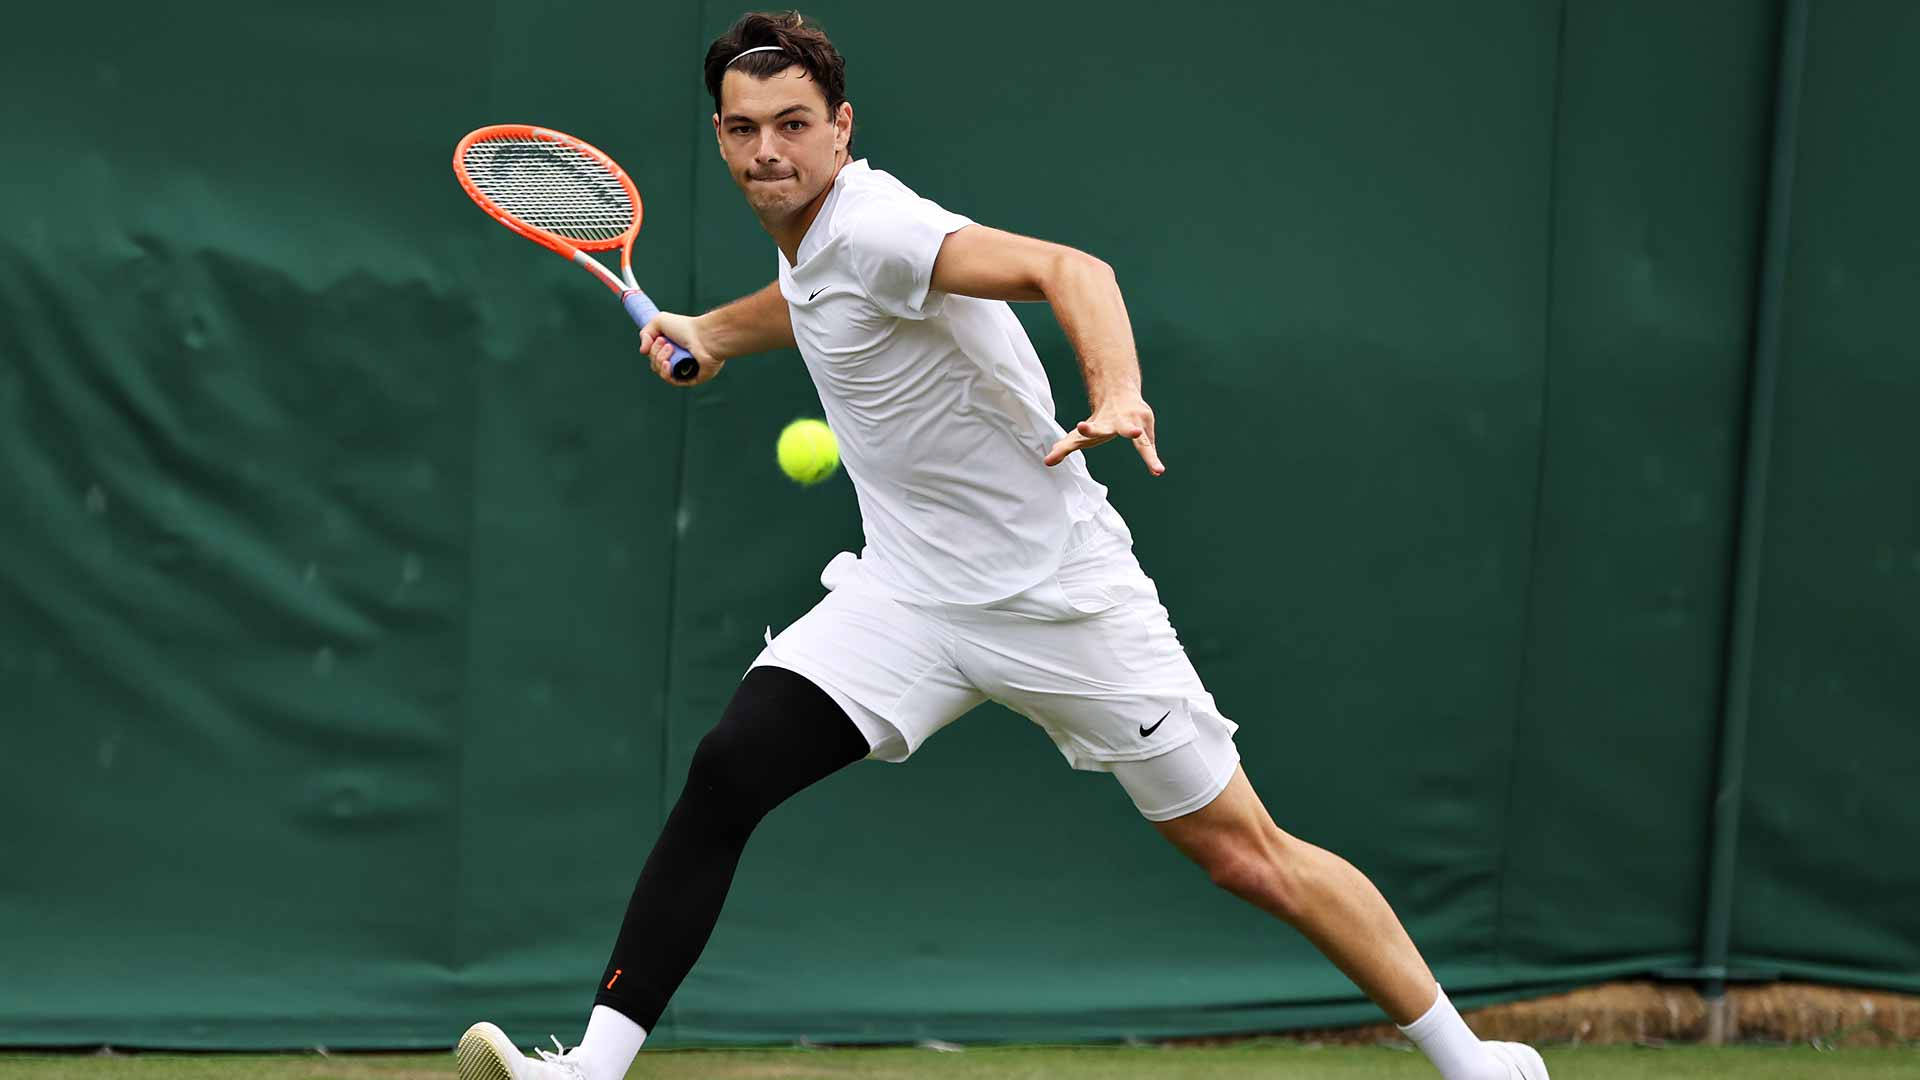 Taylor Fritz Performing Forehand Shot In Tennis Background